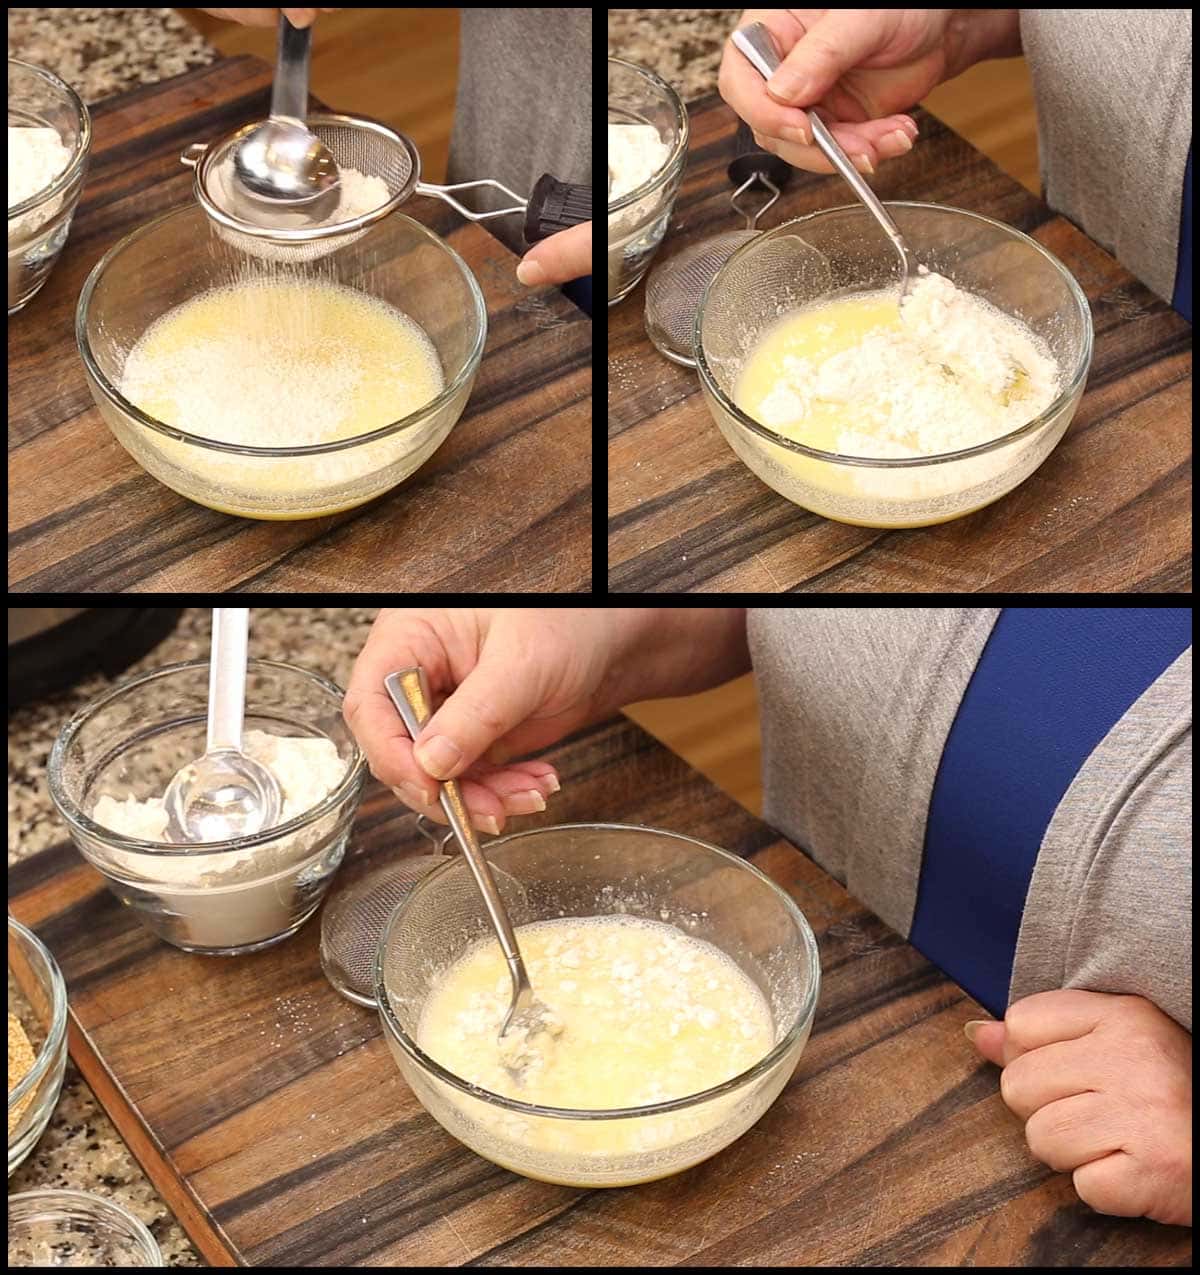 sifting and folding the flour into the egg and water mixture